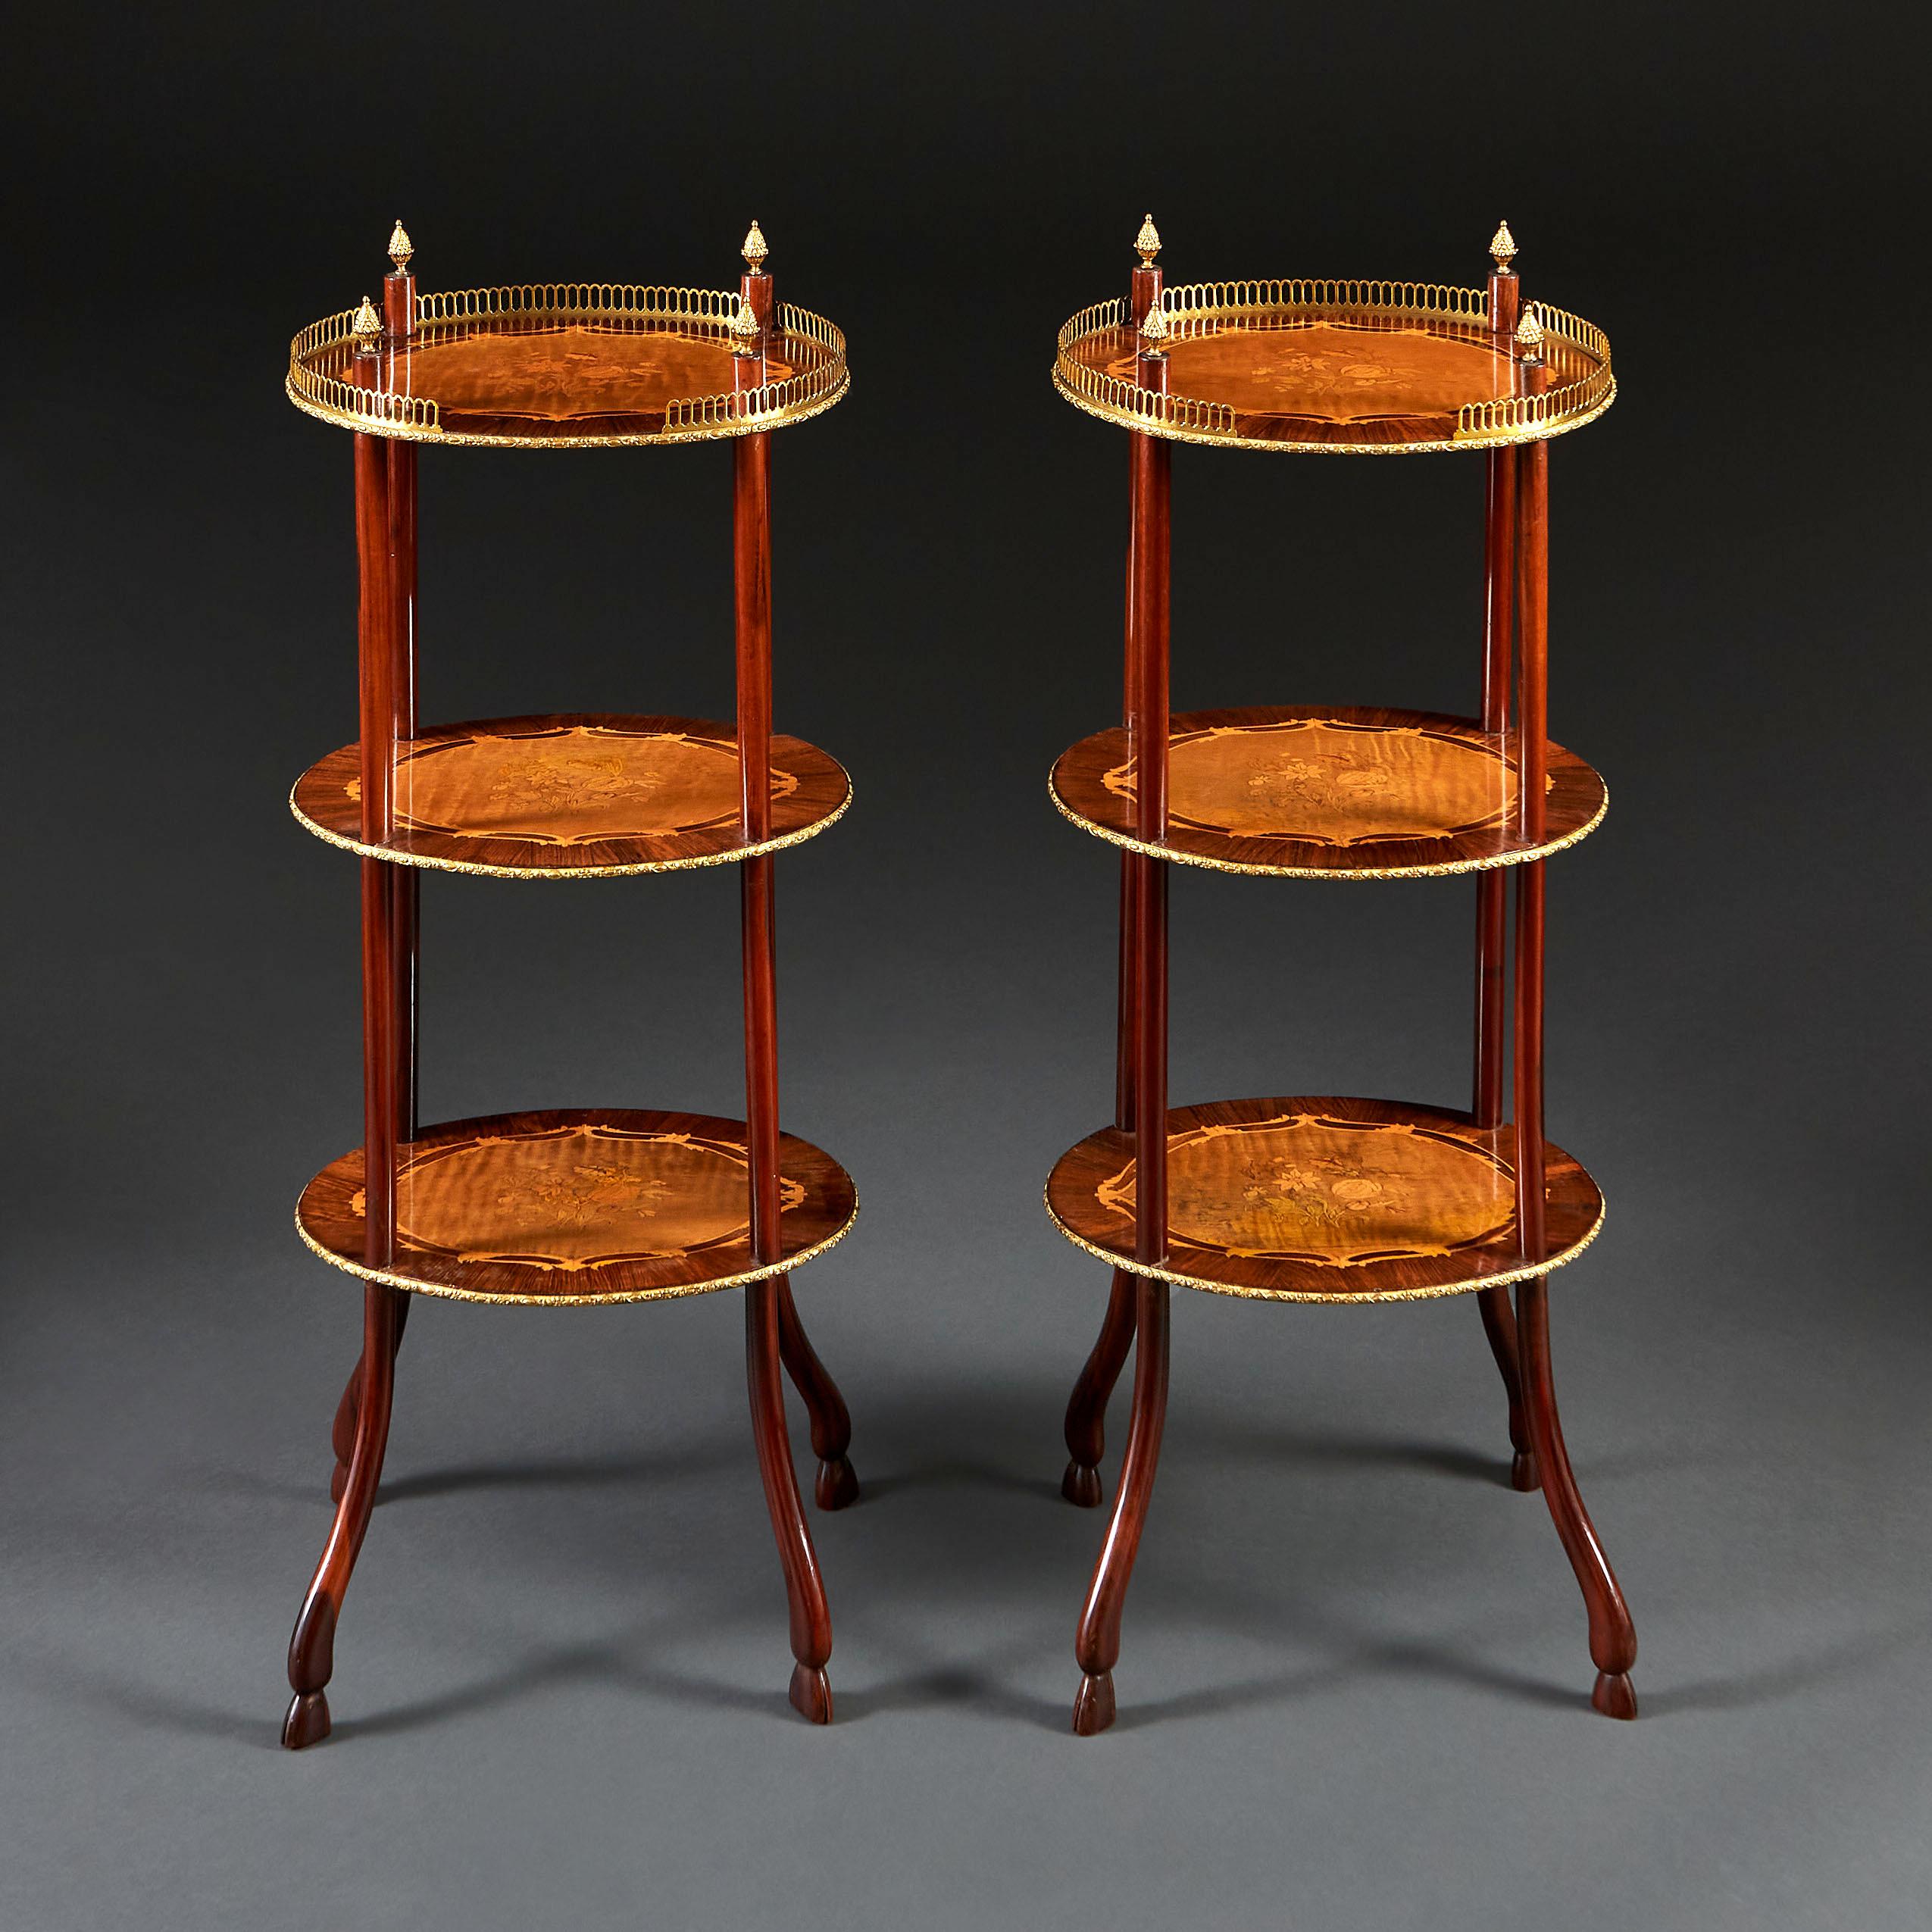 A fine pair of mid nineteenth century three tier étagères with marquetry tops and brass galleries, the uprights surmounted by brass acorn finials, and terminating in hoof feet.